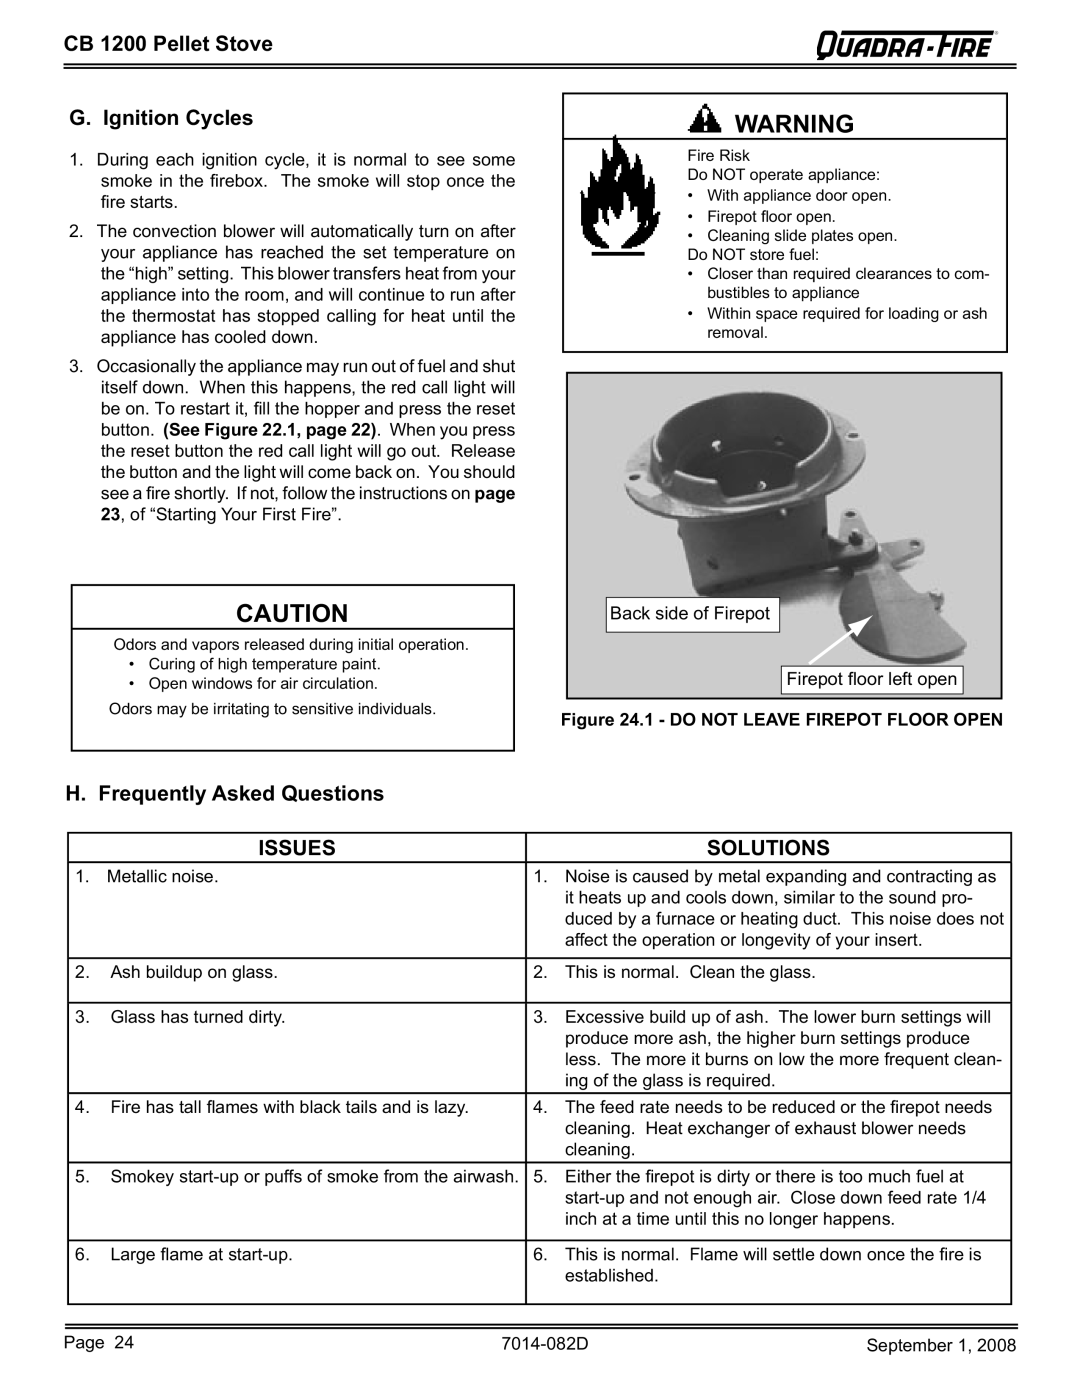 Hearth and Home Technologies CB1200-B owner manual CB 1200 Pellet Stove Ignition Cycles, Frequently Asked Questions 